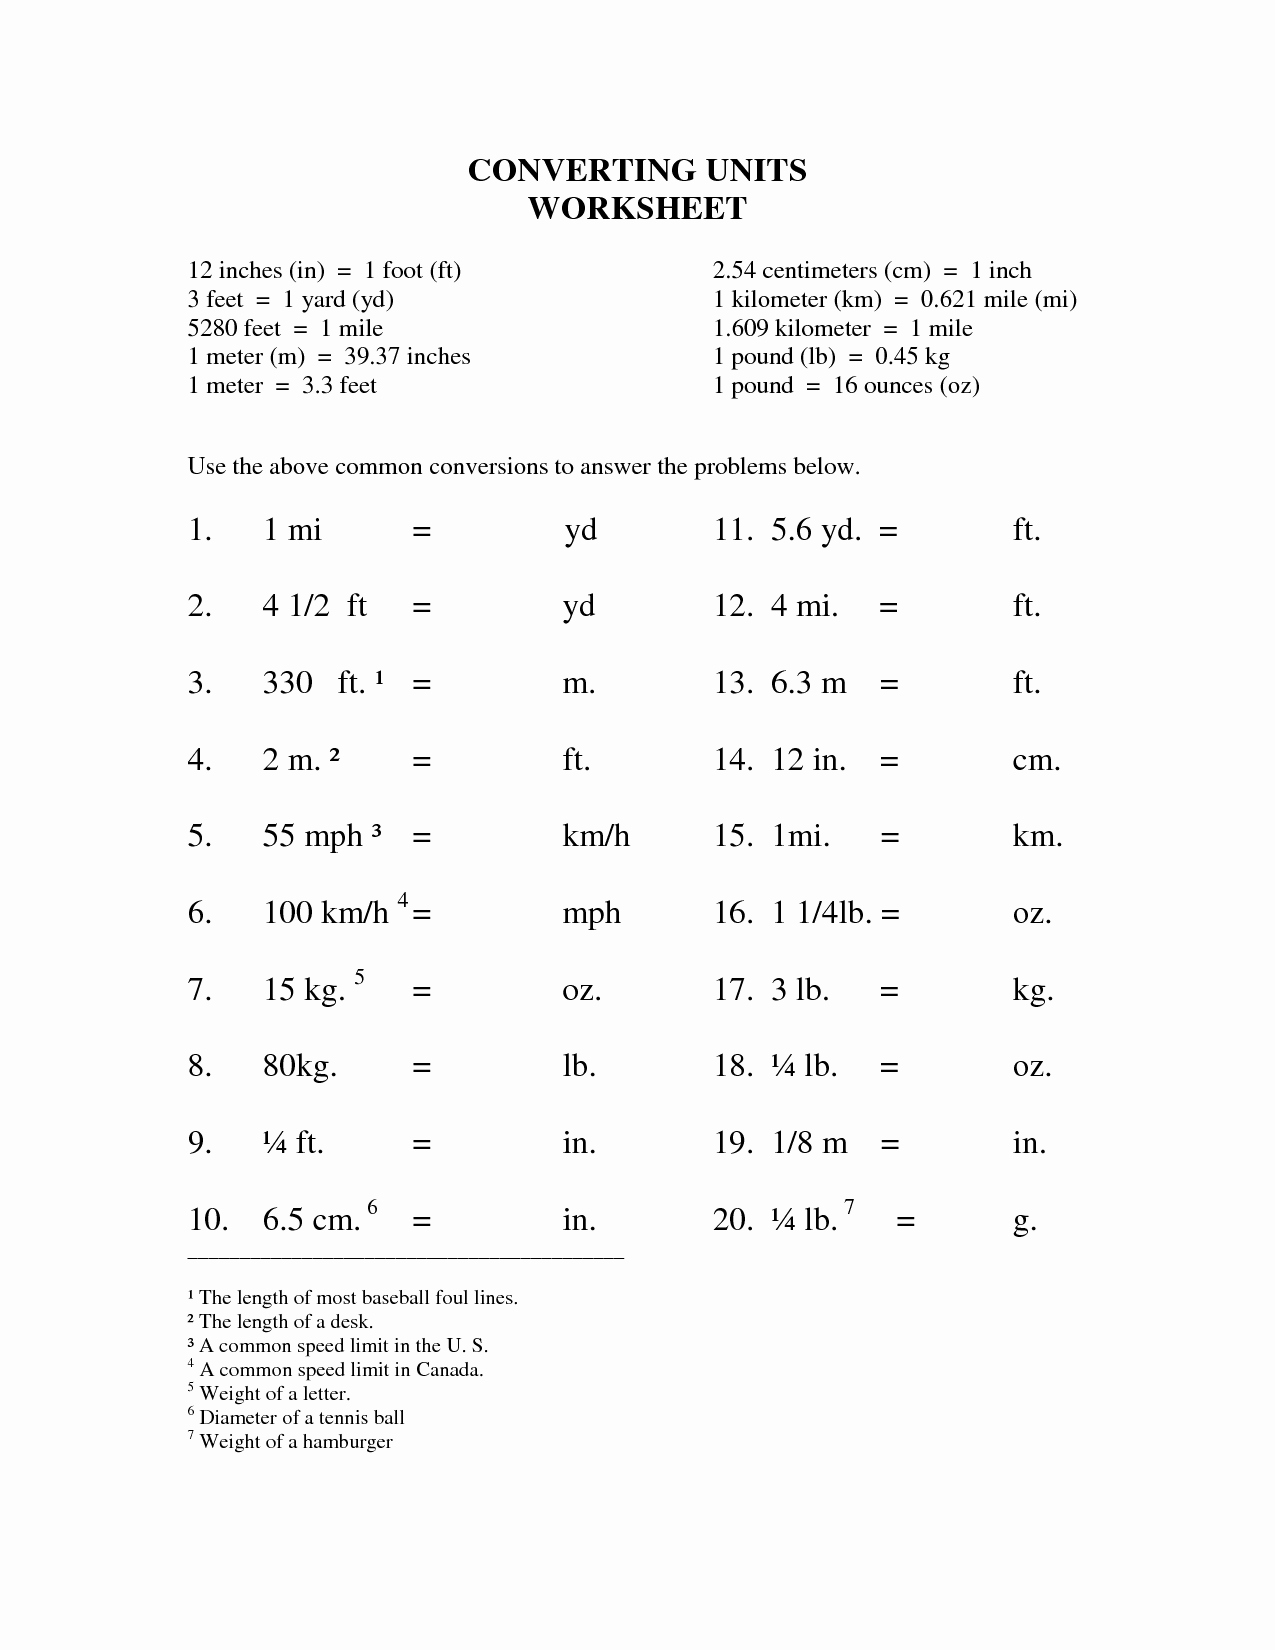 Measuring Units Worksheet Answer Key Beautiful 13 Best Of Yards to Inches Worksheets Customary